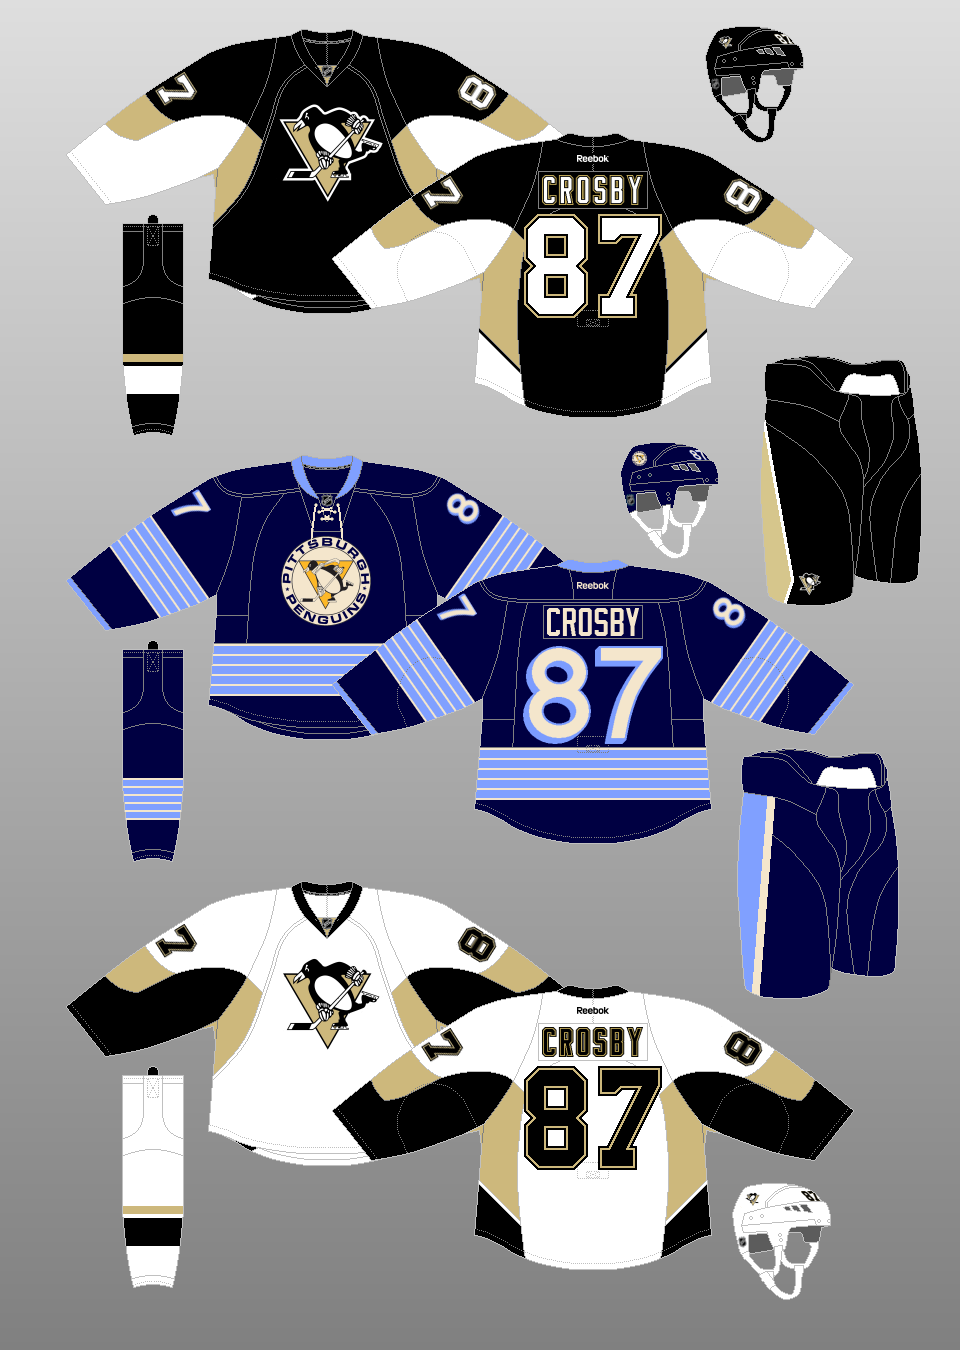 penguins jerseys through the years